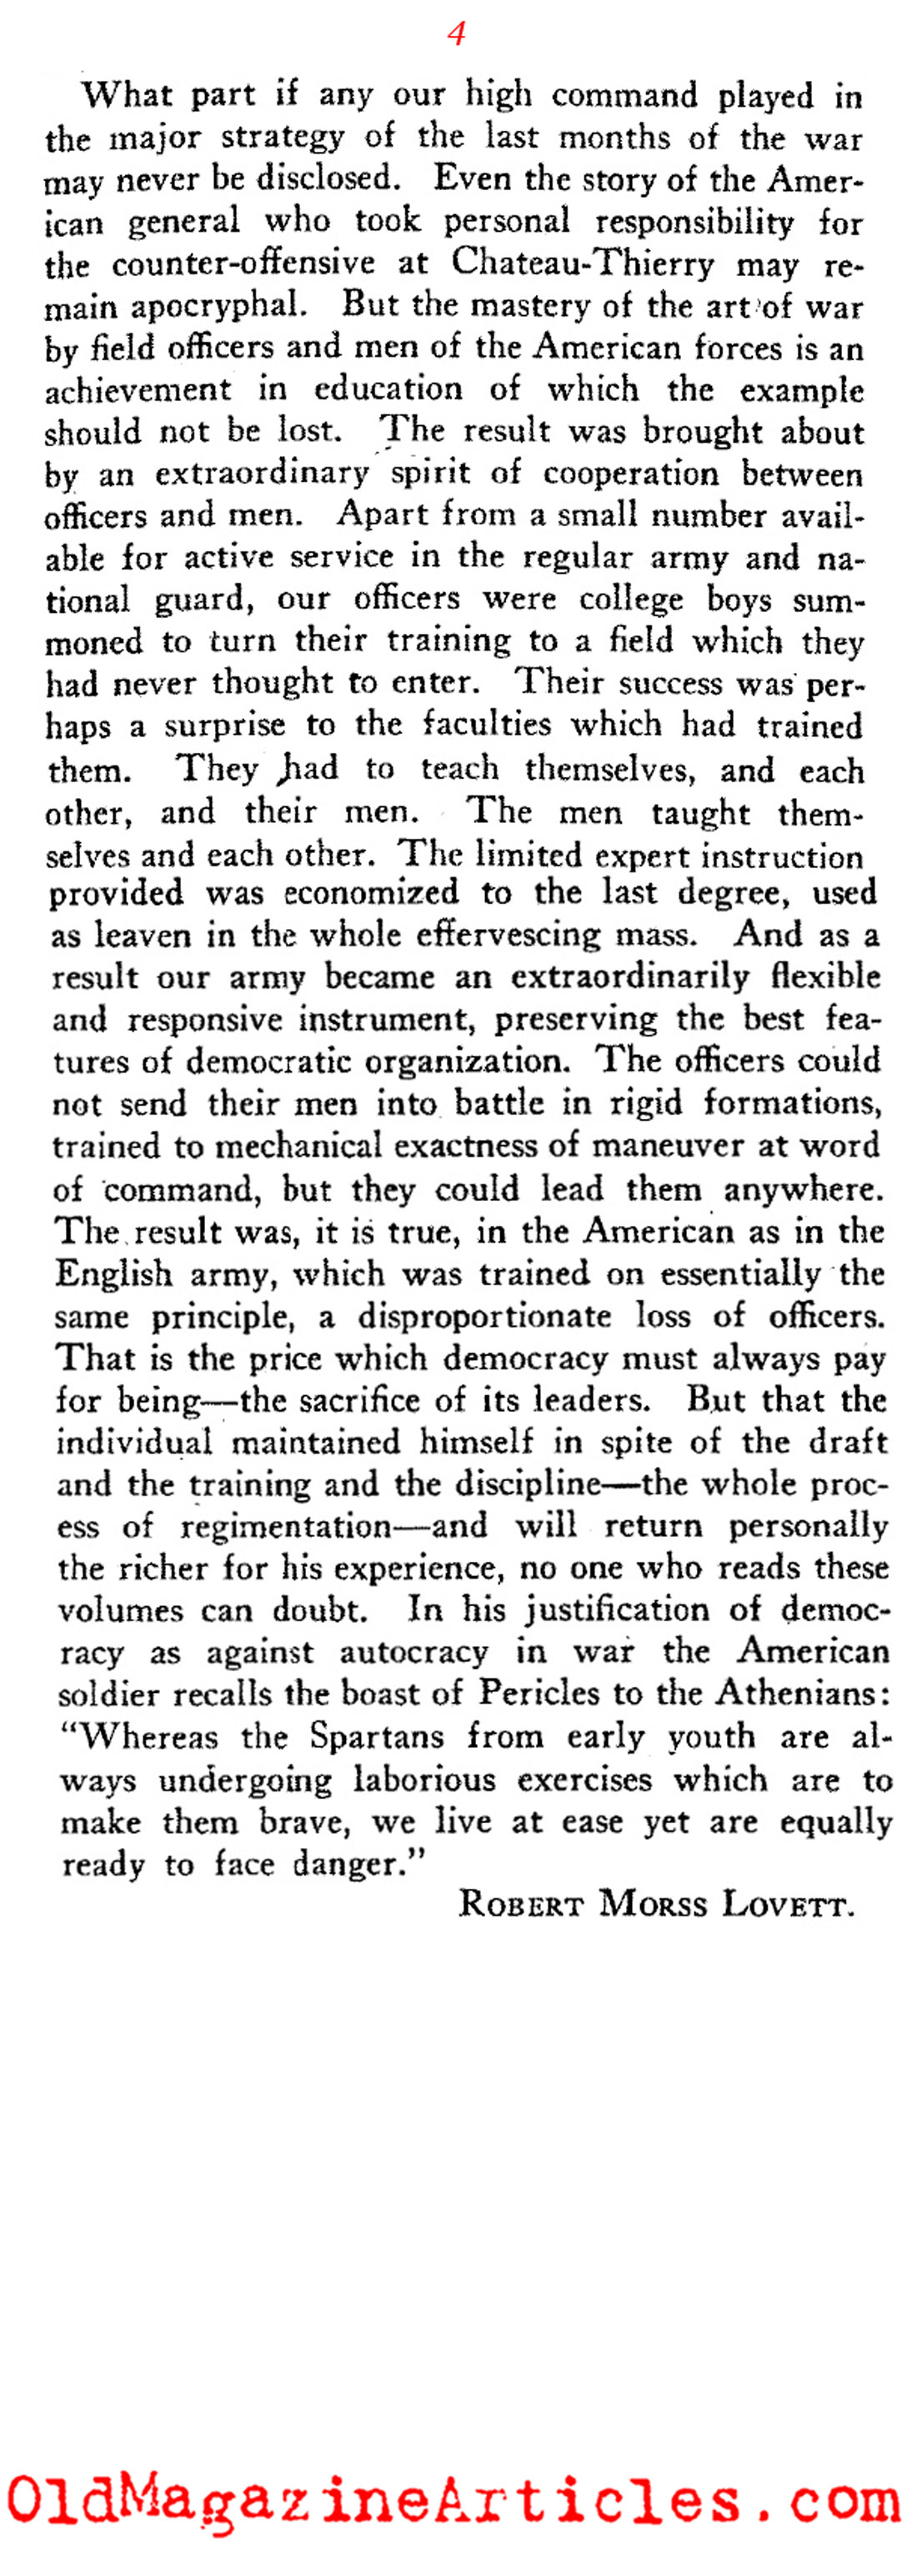 A Review of Two W.W. I Books (The Dial Magazine, 1919)